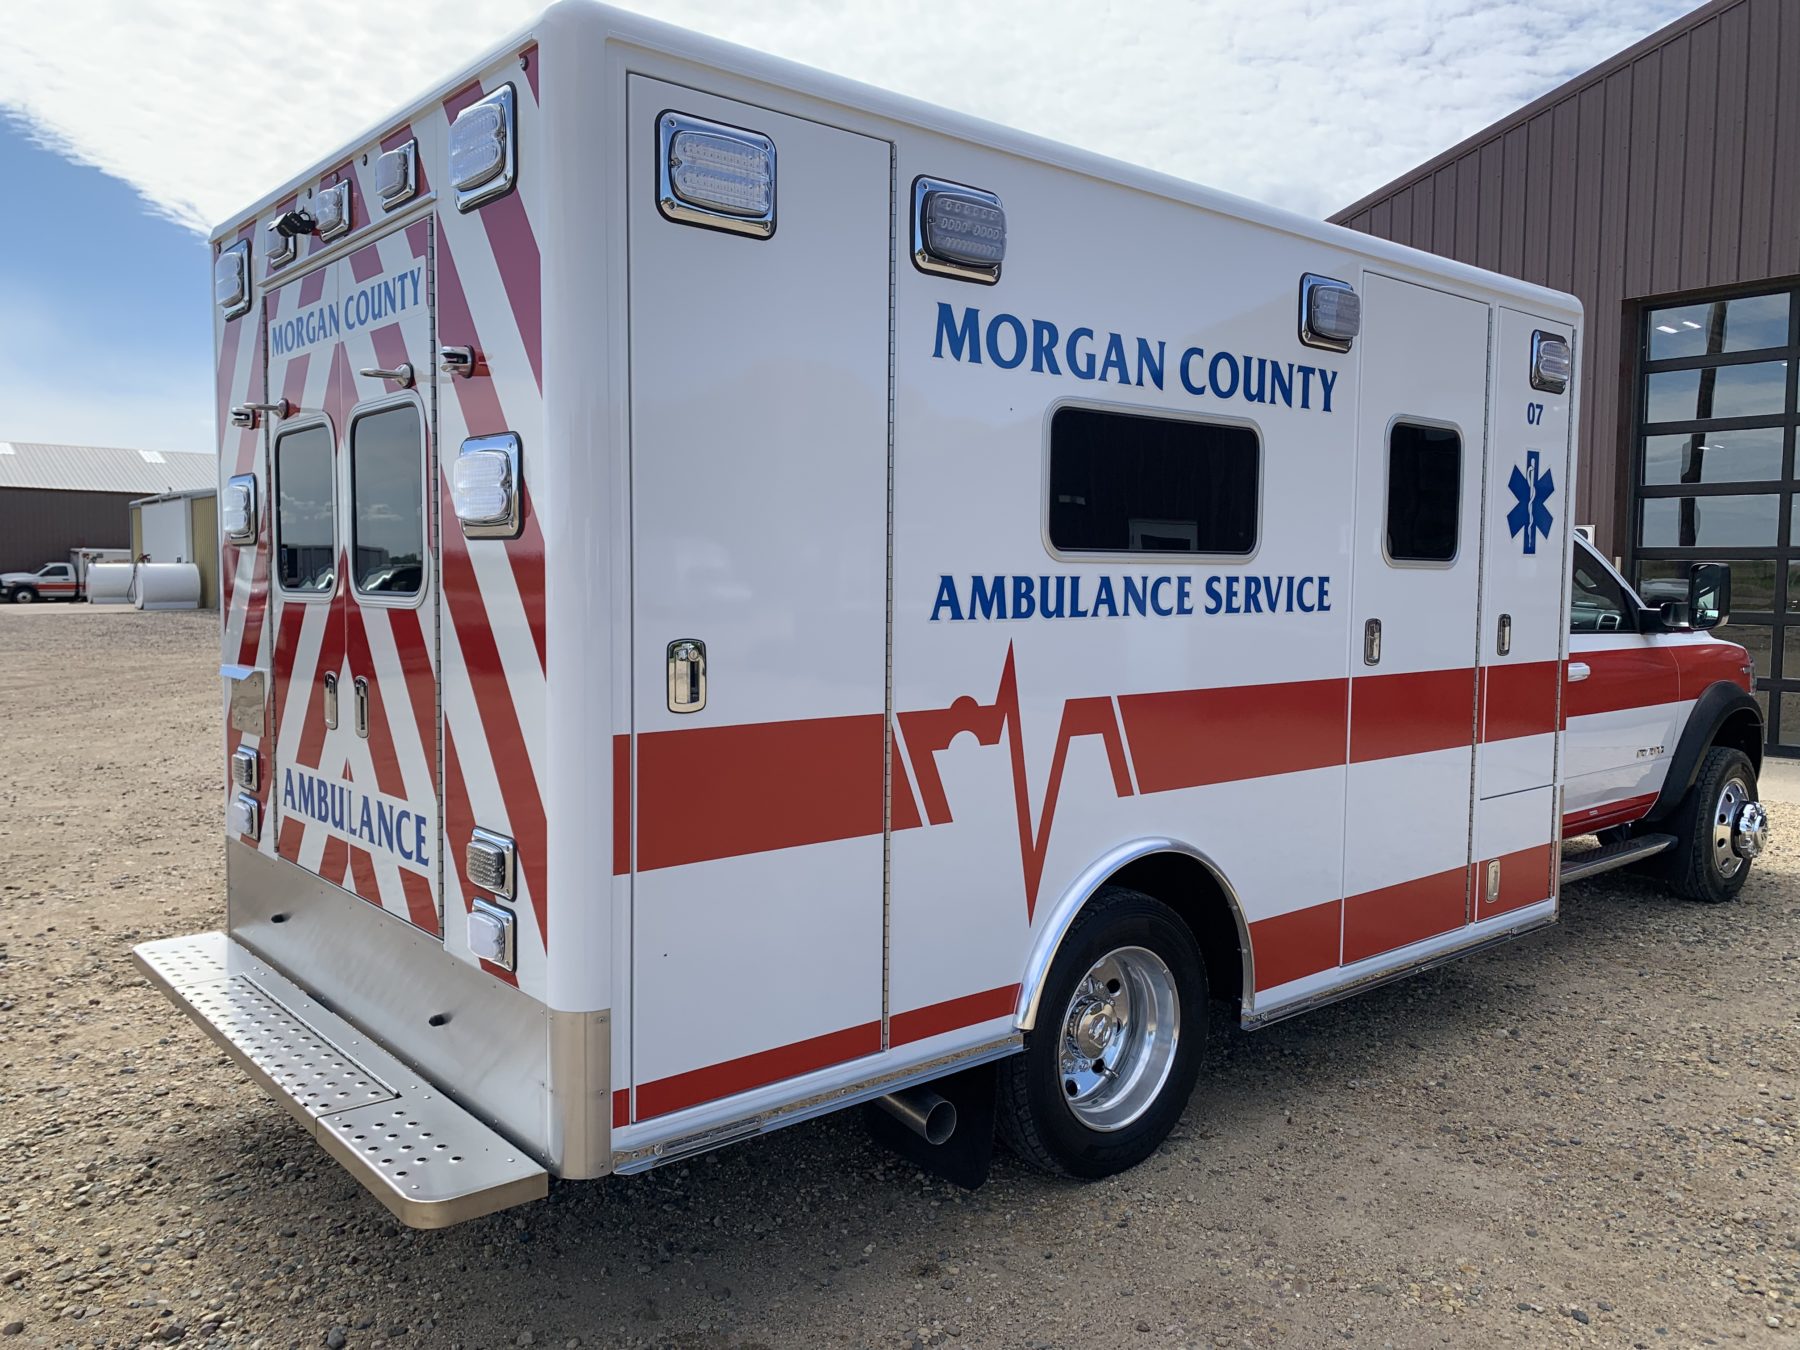 2021 Ram 4500 4x4 Heavy Duty Ambulance For Sale – Picture 6